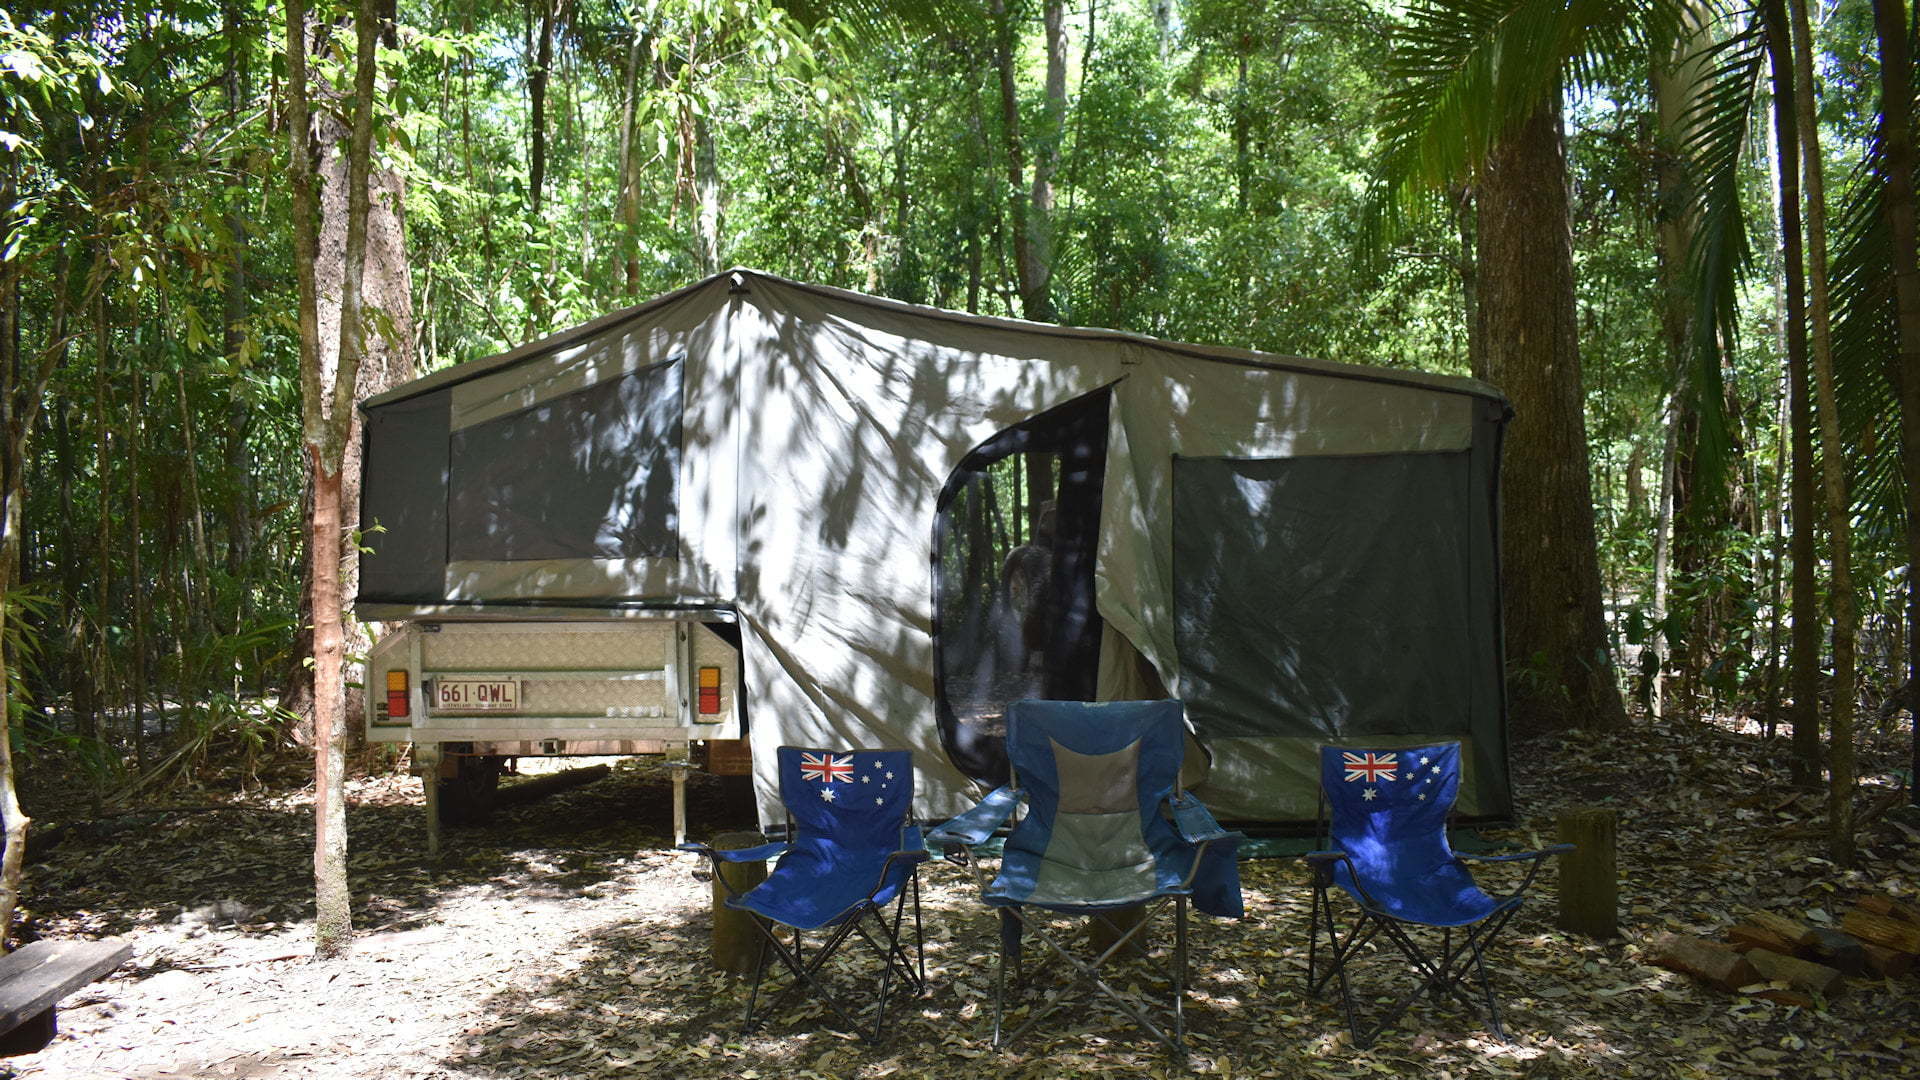 Camper trailer and camp chairs at Iron Pot Creek campground in Toonumbar National Park